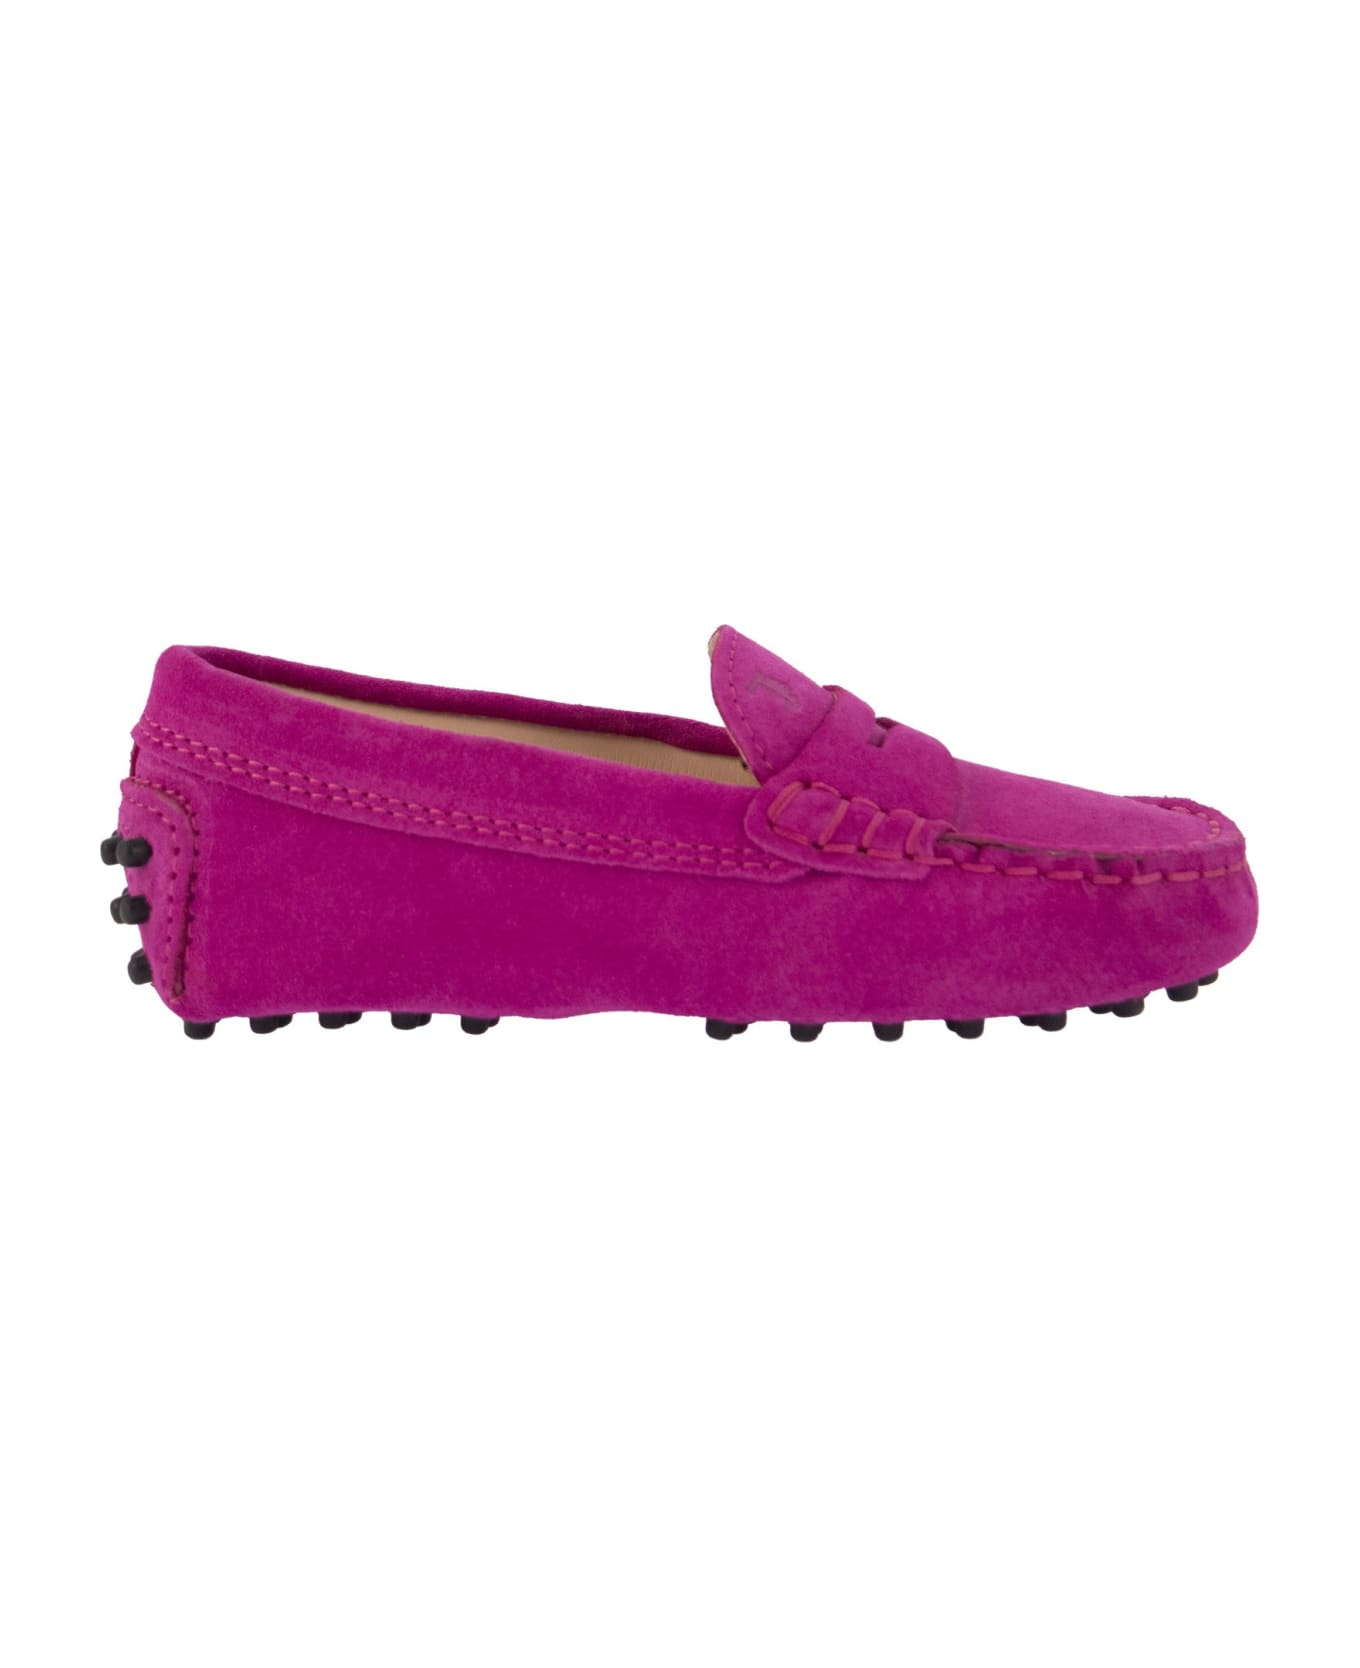 Tod's Suede Loafer - Fuxia シューズ